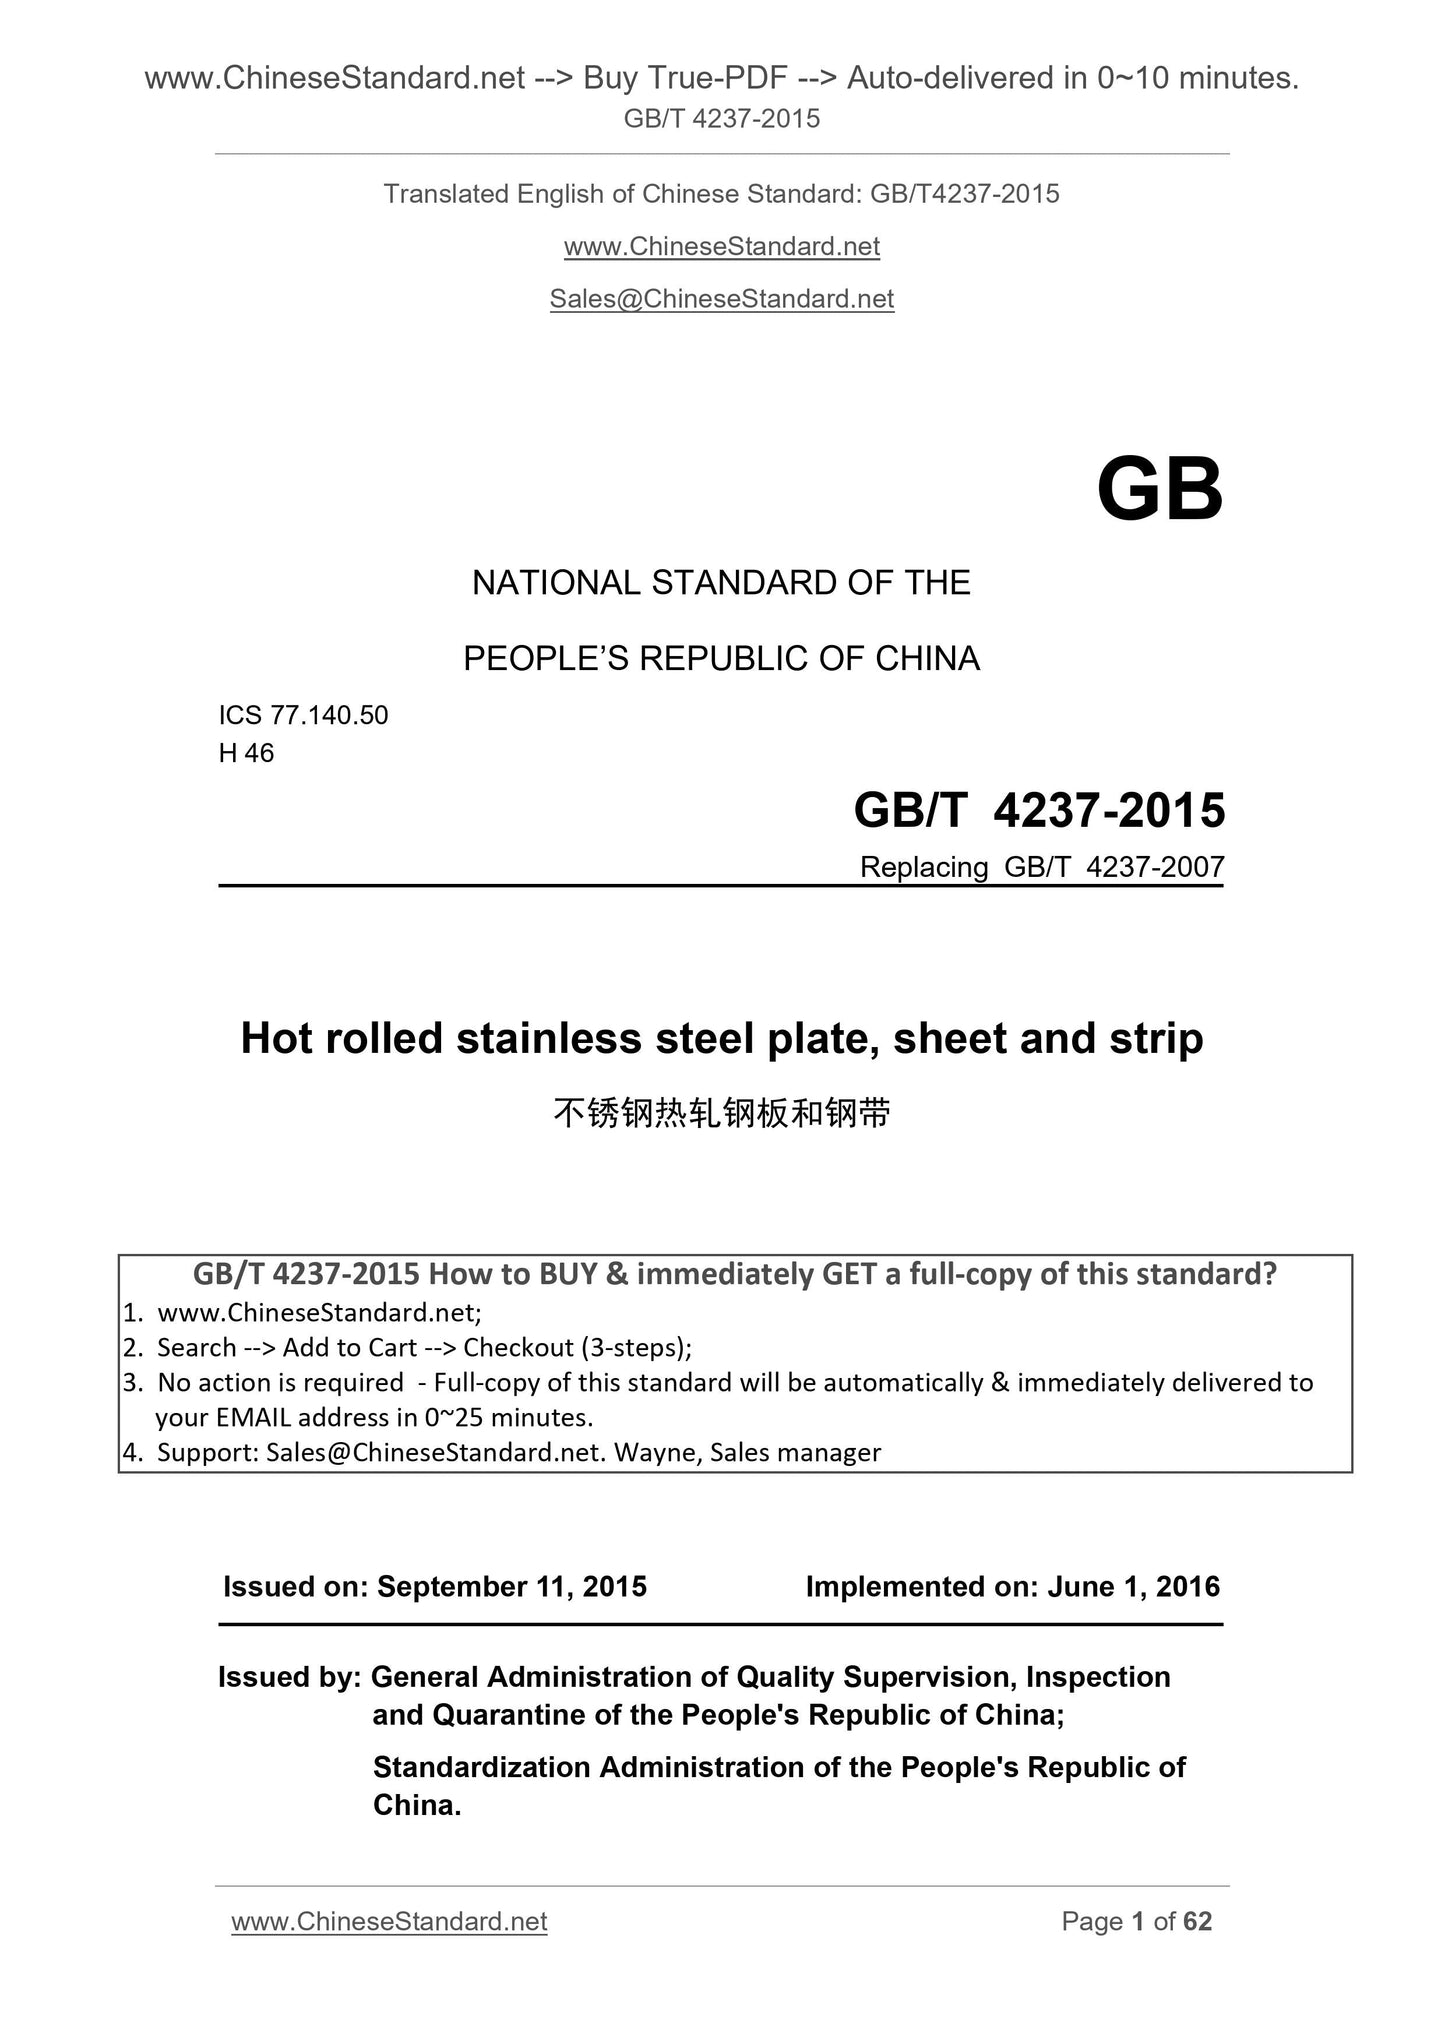 GB/T 4237-2015 Page 1